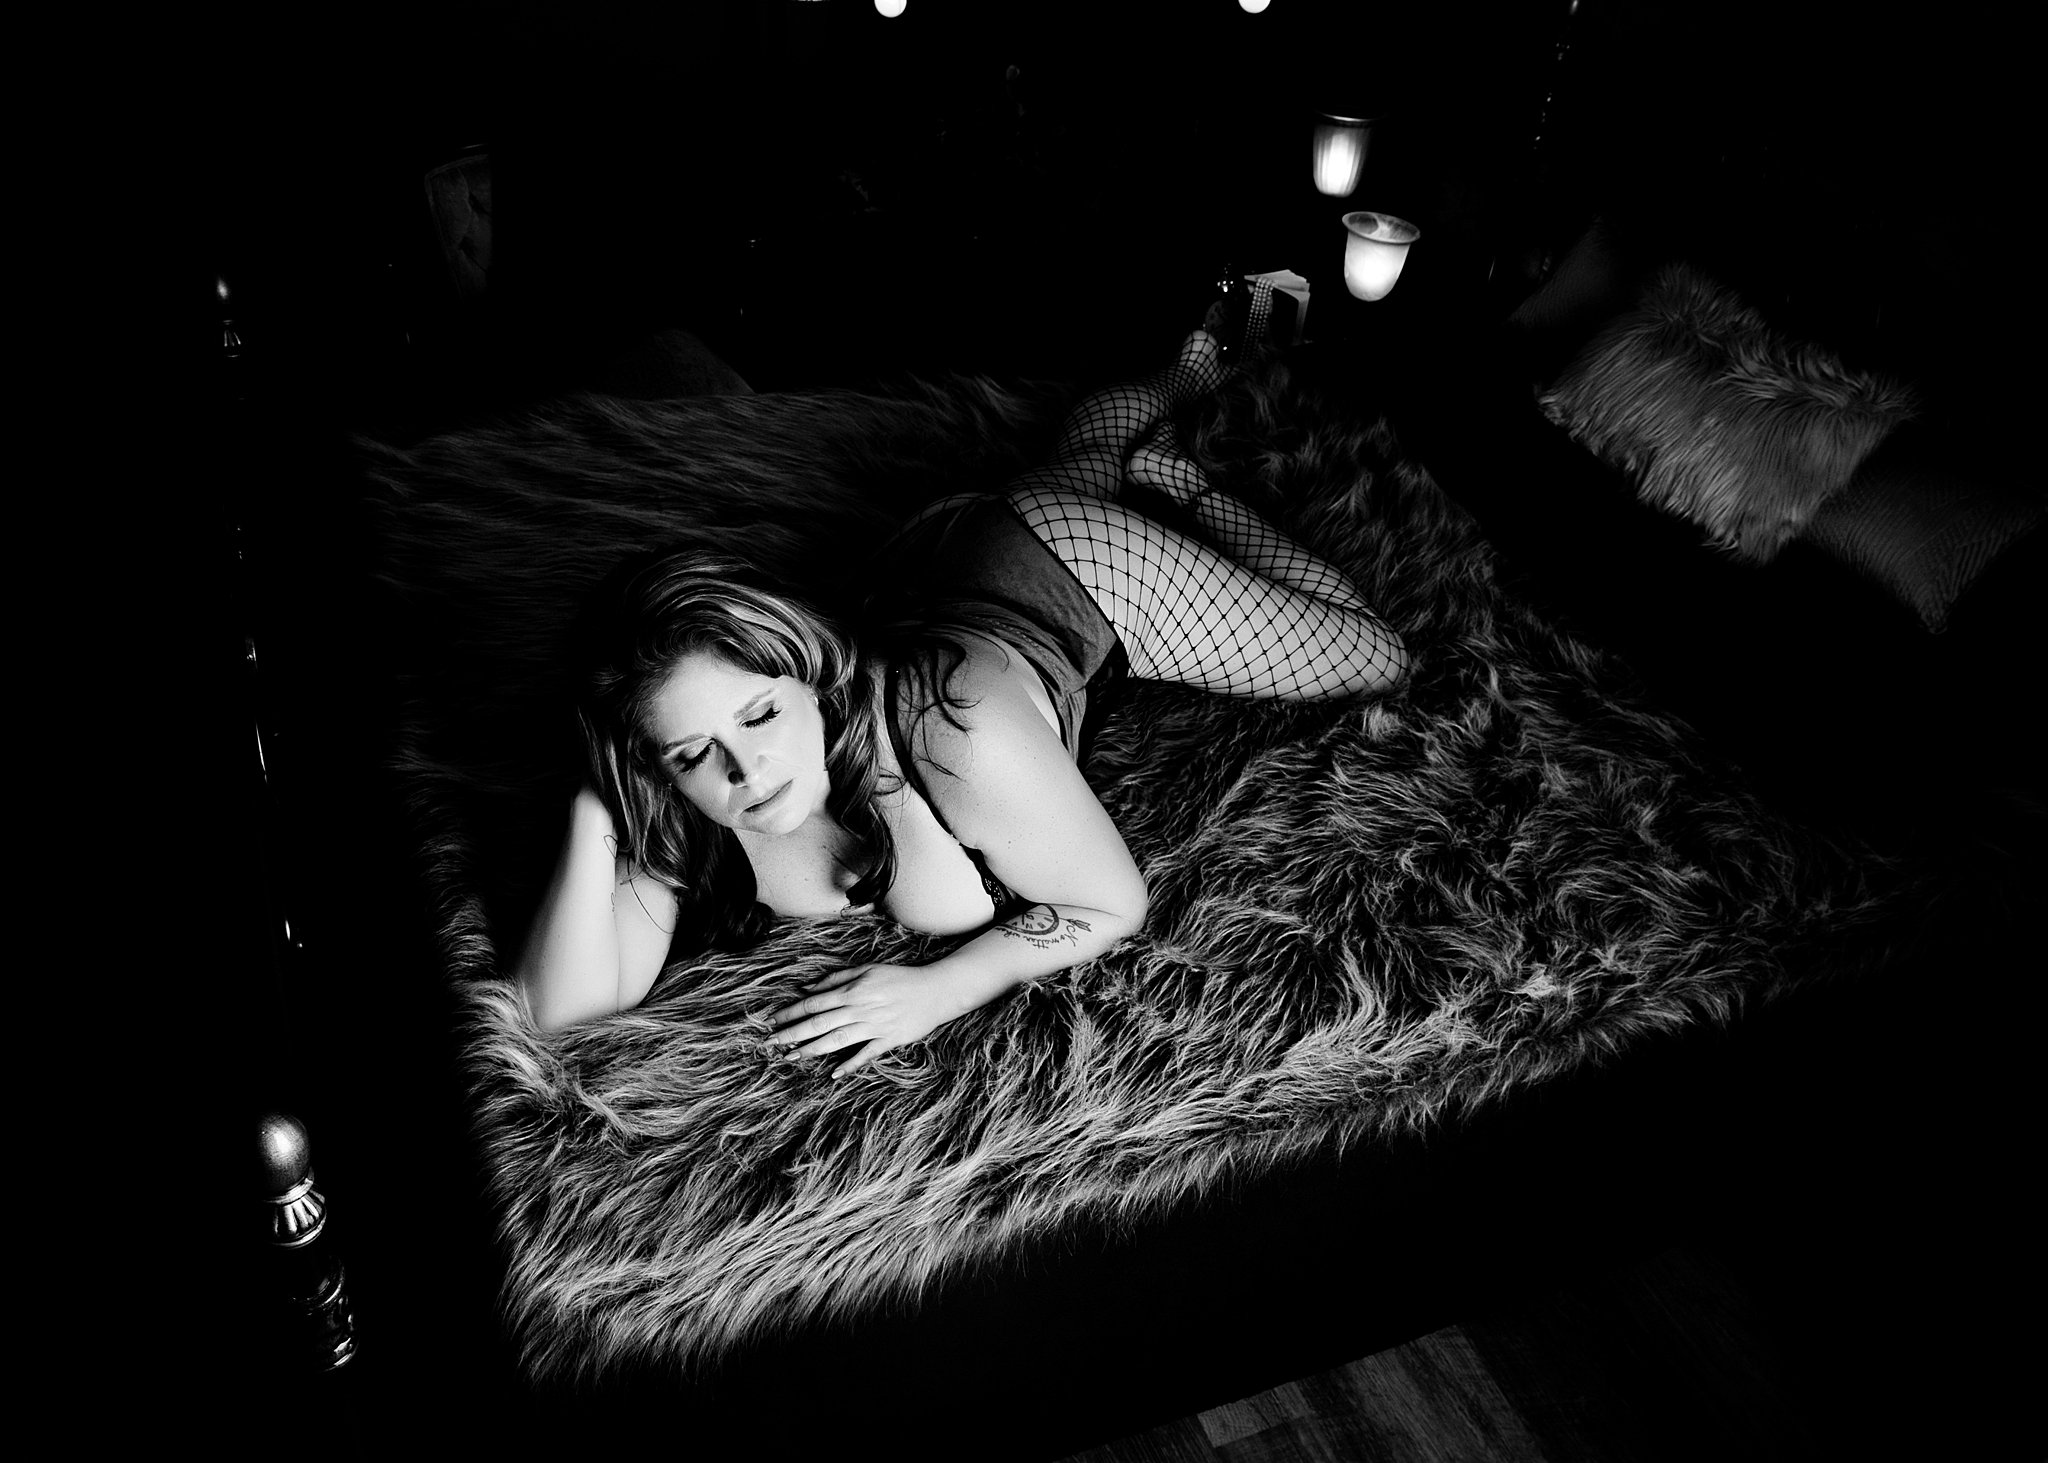 A woman in fishnets and lingerie lays across a bed in a studio on a fur blanket